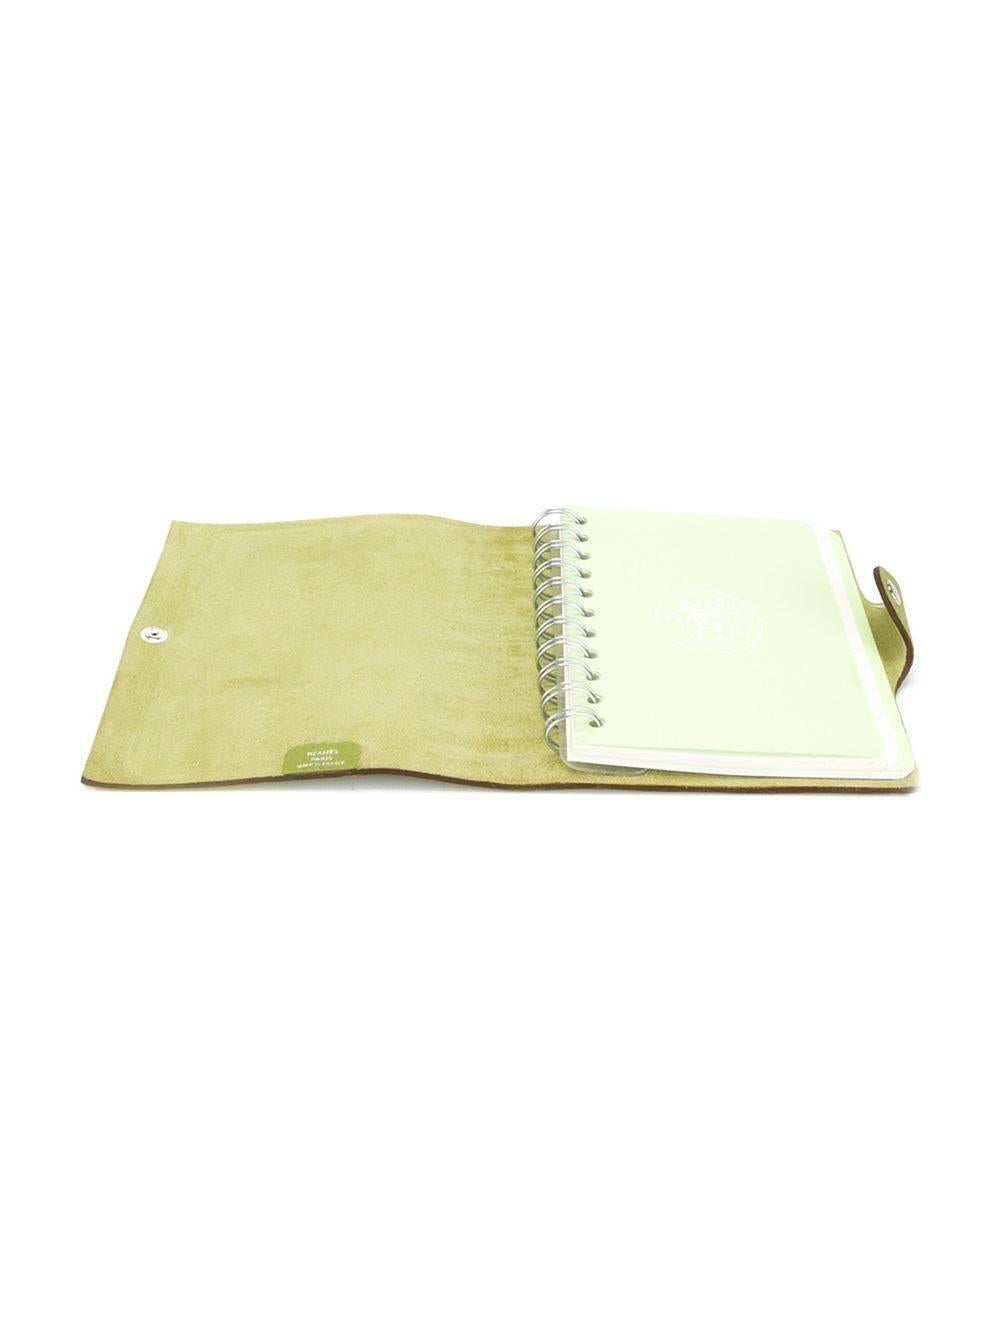 Green Hermes Leather Cover Notebook